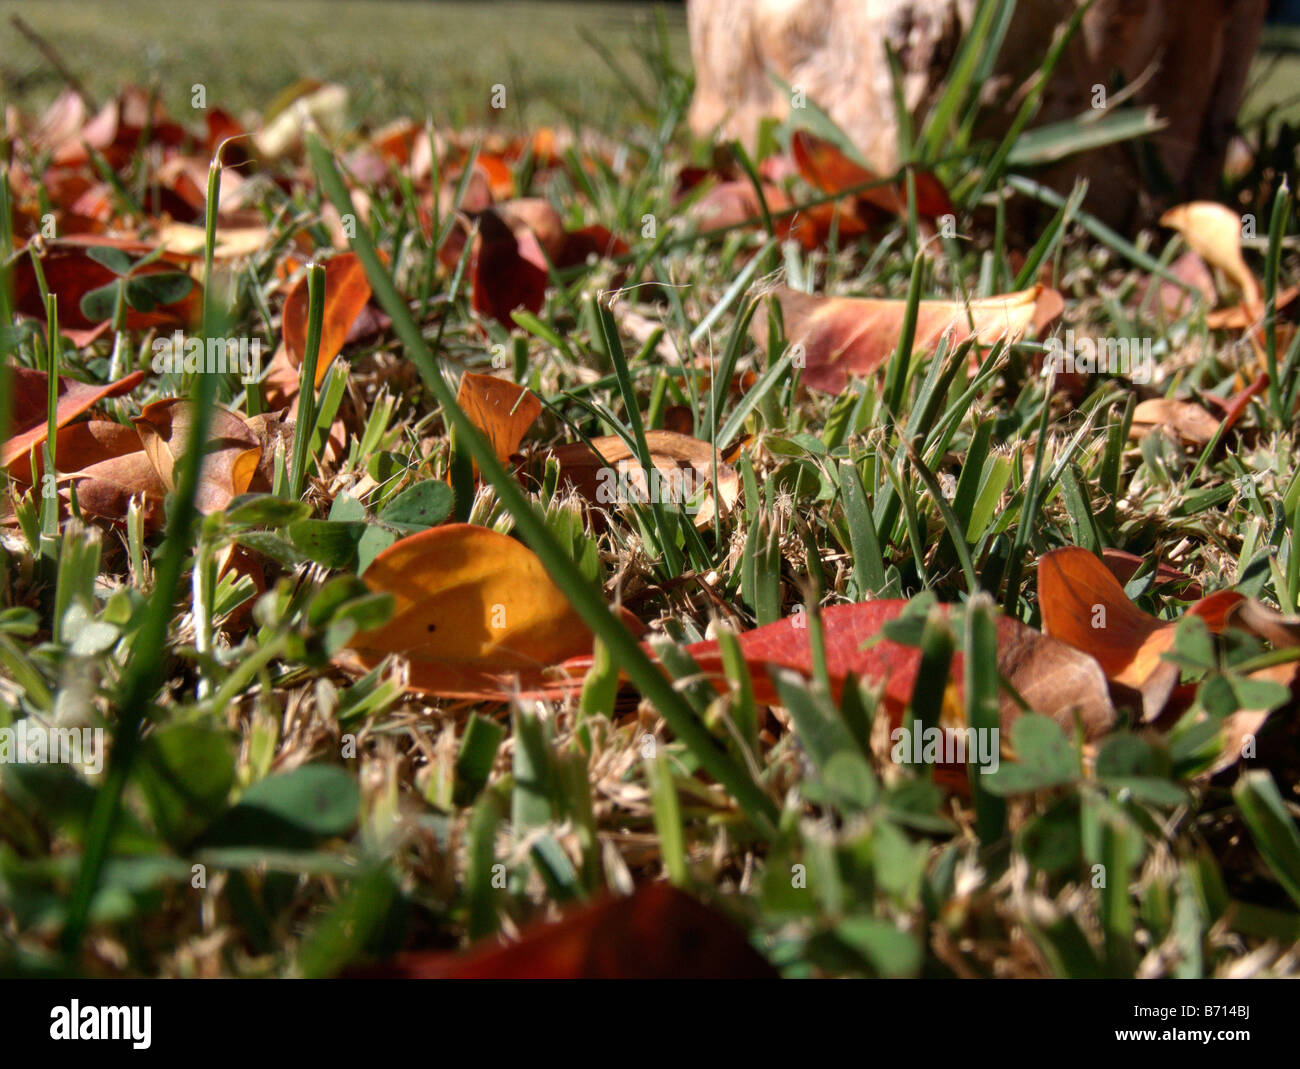 Autumn leaves over the grass Stock Photo